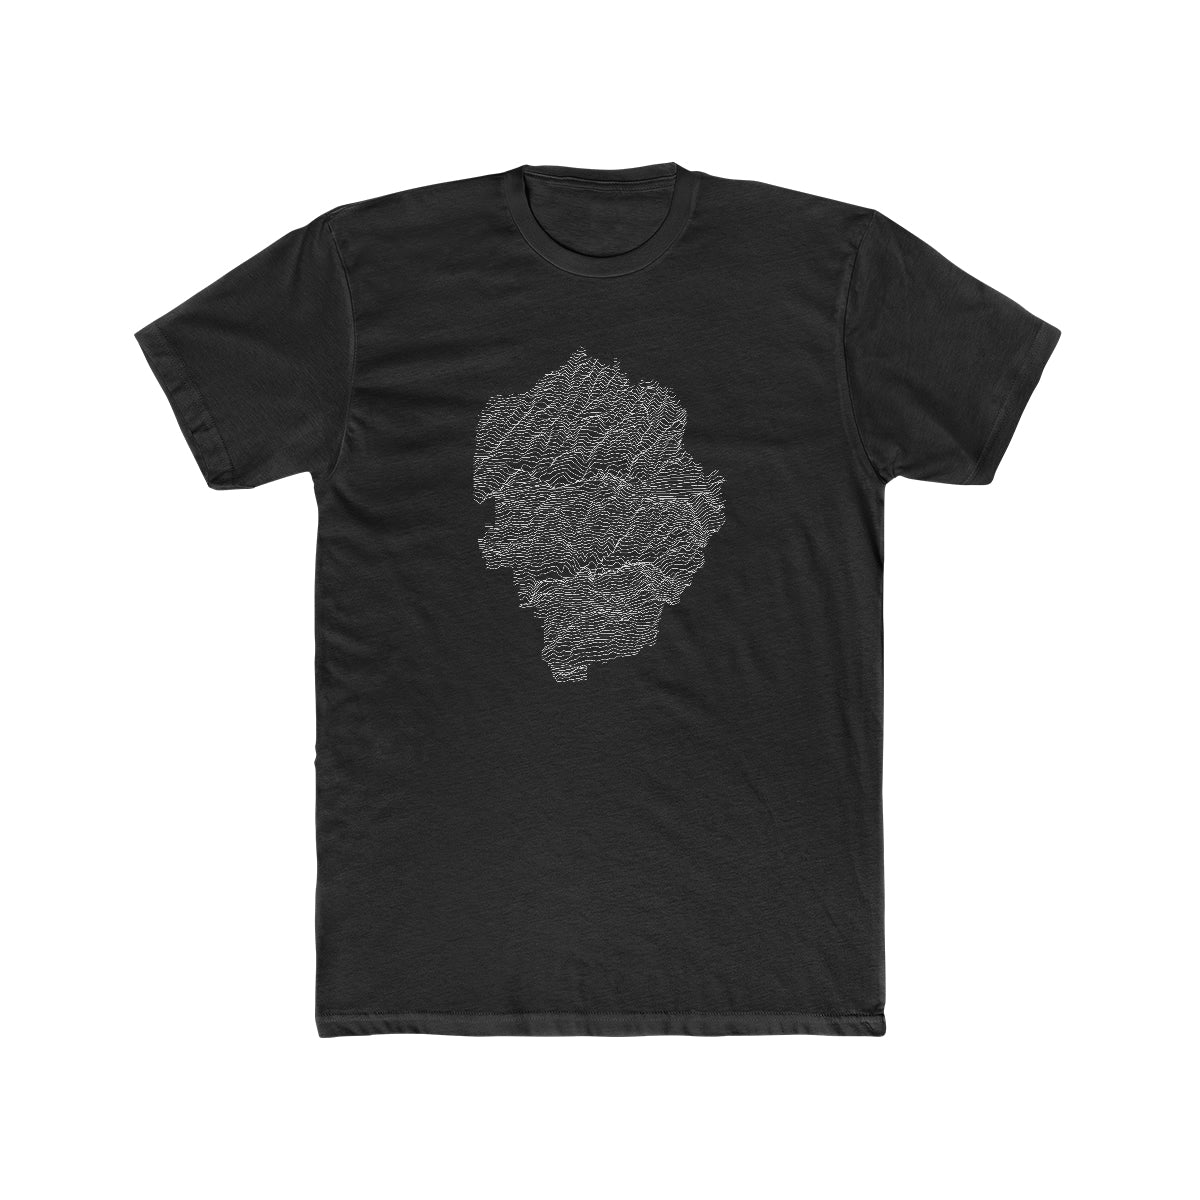 Limited Edition Yosemite National Park T-Shirt - Lines